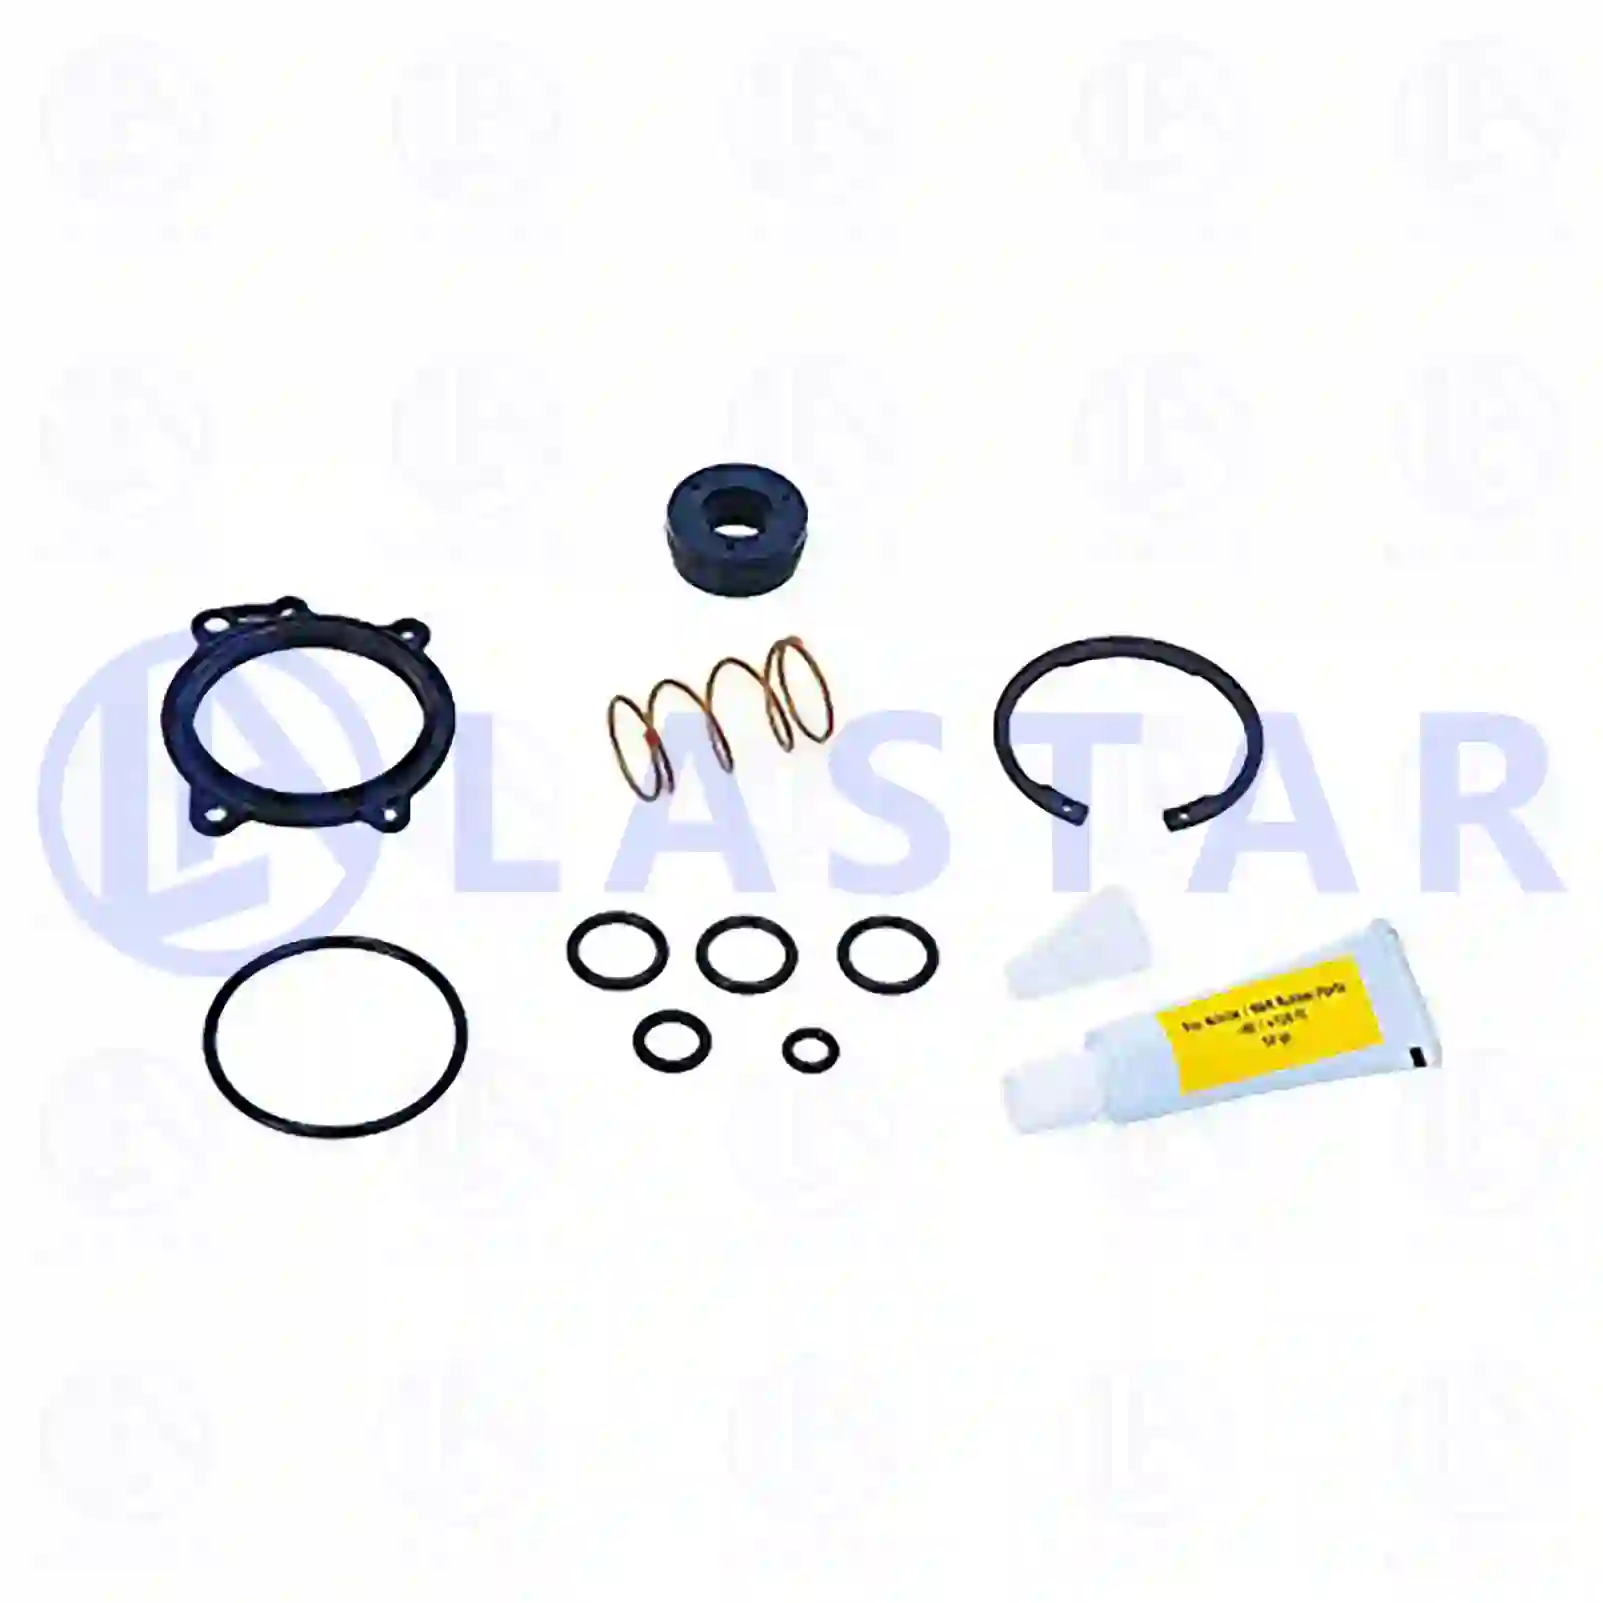 Repair kit, modulating valve, 77717594, 504100409S, 5801290649S, 7420428938S, 7420570906S, 7420828237S, 7421122034S, 7485003022S, 20428938S, 20570906S, 20828237S, 21122034S ||  77717594 Lastar Spare Part | Truck Spare Parts, Auotomotive Spare Parts Repair kit, modulating valve, 77717594, 504100409S, 5801290649S, 7420428938S, 7420570906S, 7420828237S, 7421122034S, 7485003022S, 20428938S, 20570906S, 20828237S, 21122034S ||  77717594 Lastar Spare Part | Truck Spare Parts, Auotomotive Spare Parts